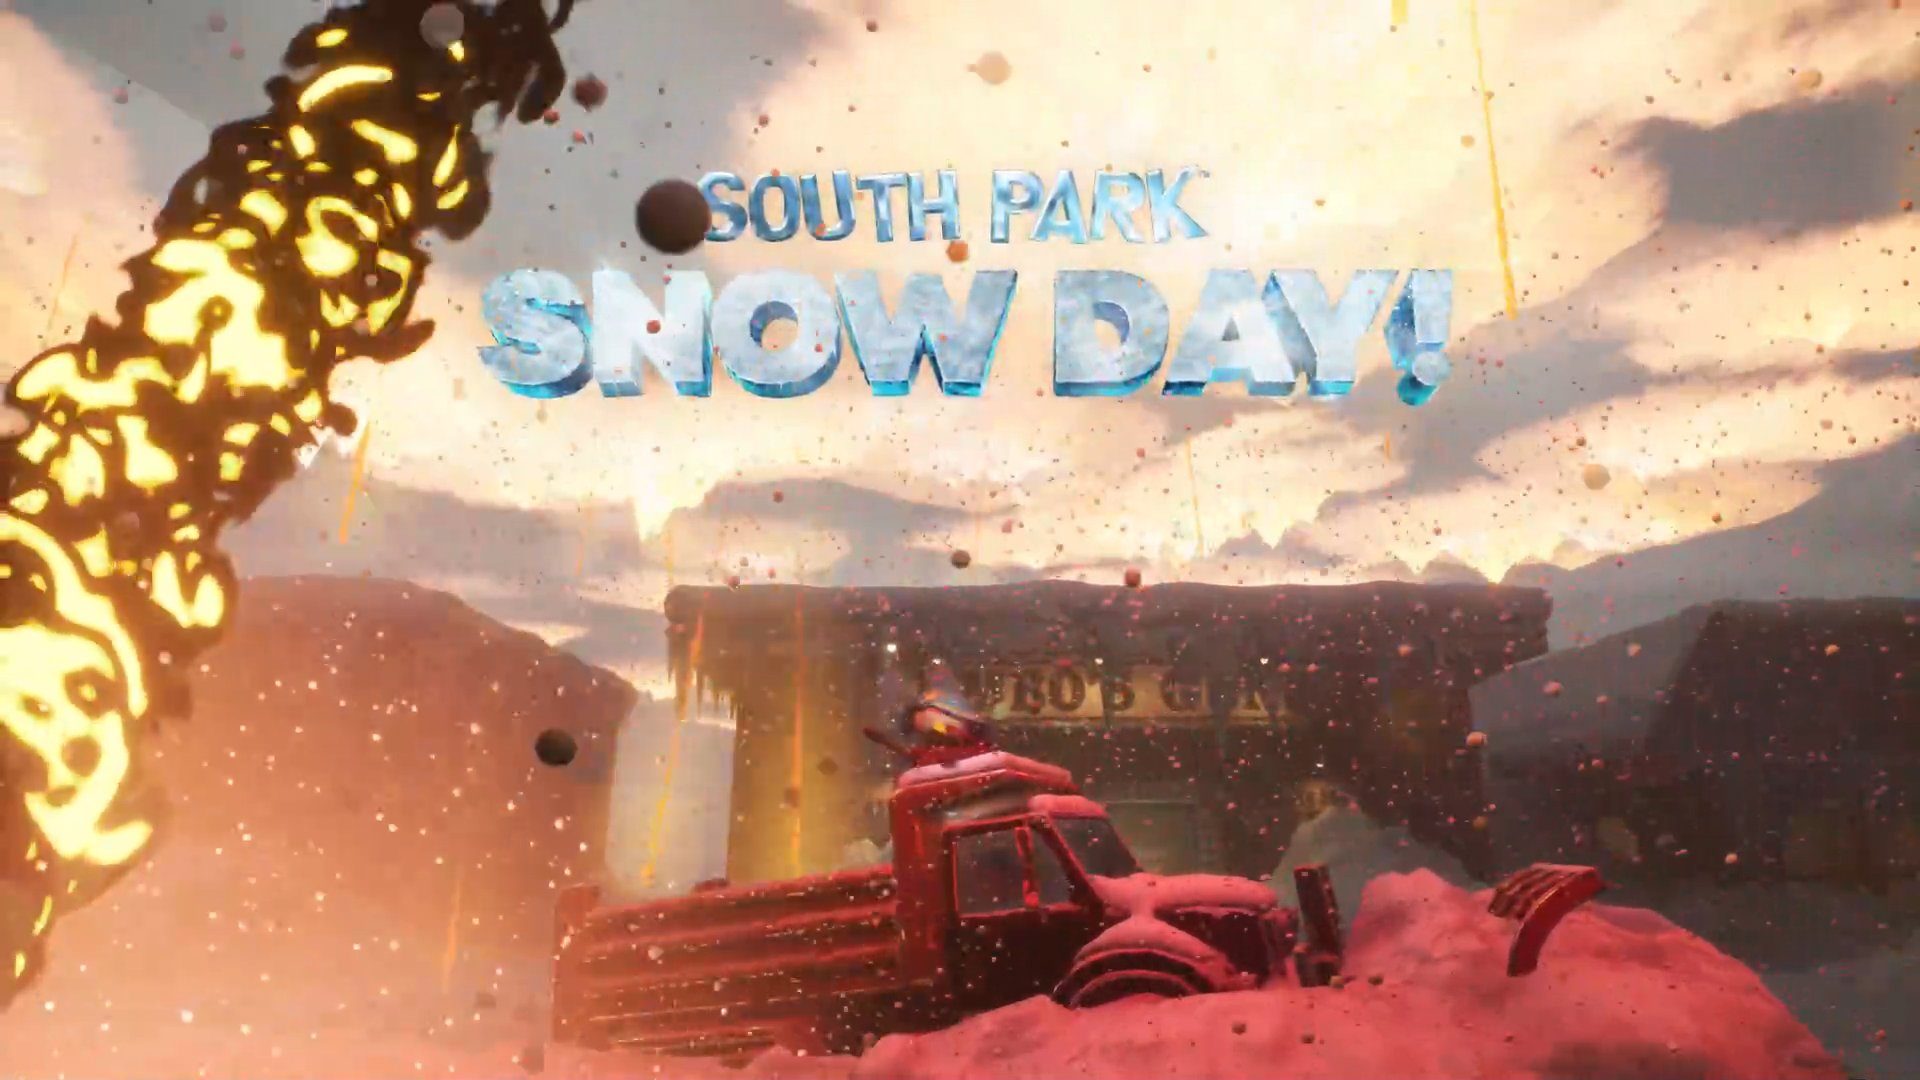 South Park: Snow Day Reveal Trailer Released - mxdwn Games